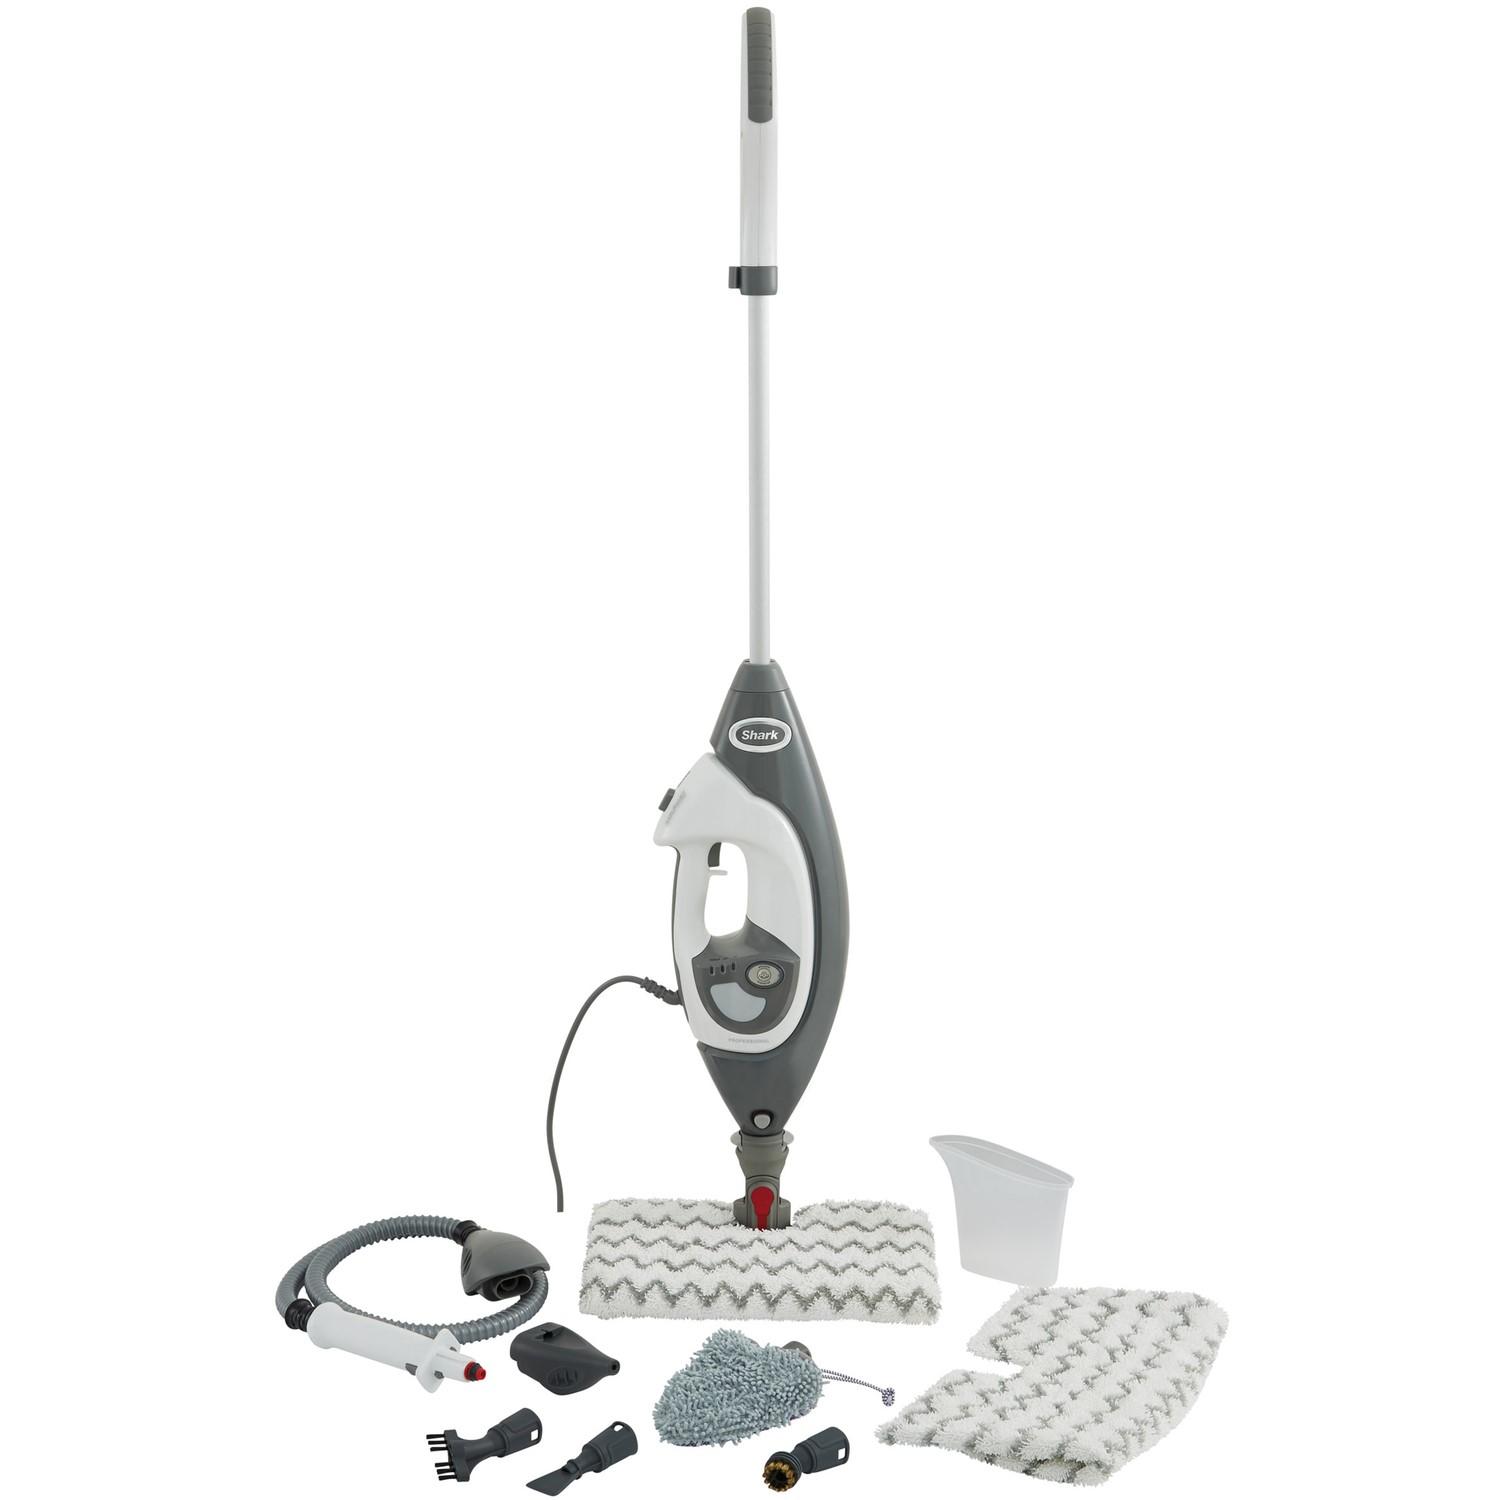 Photos - Other for Computer SHARK Floor and Handheld Steam Cleaner & Mop - Grey & White S6005U 